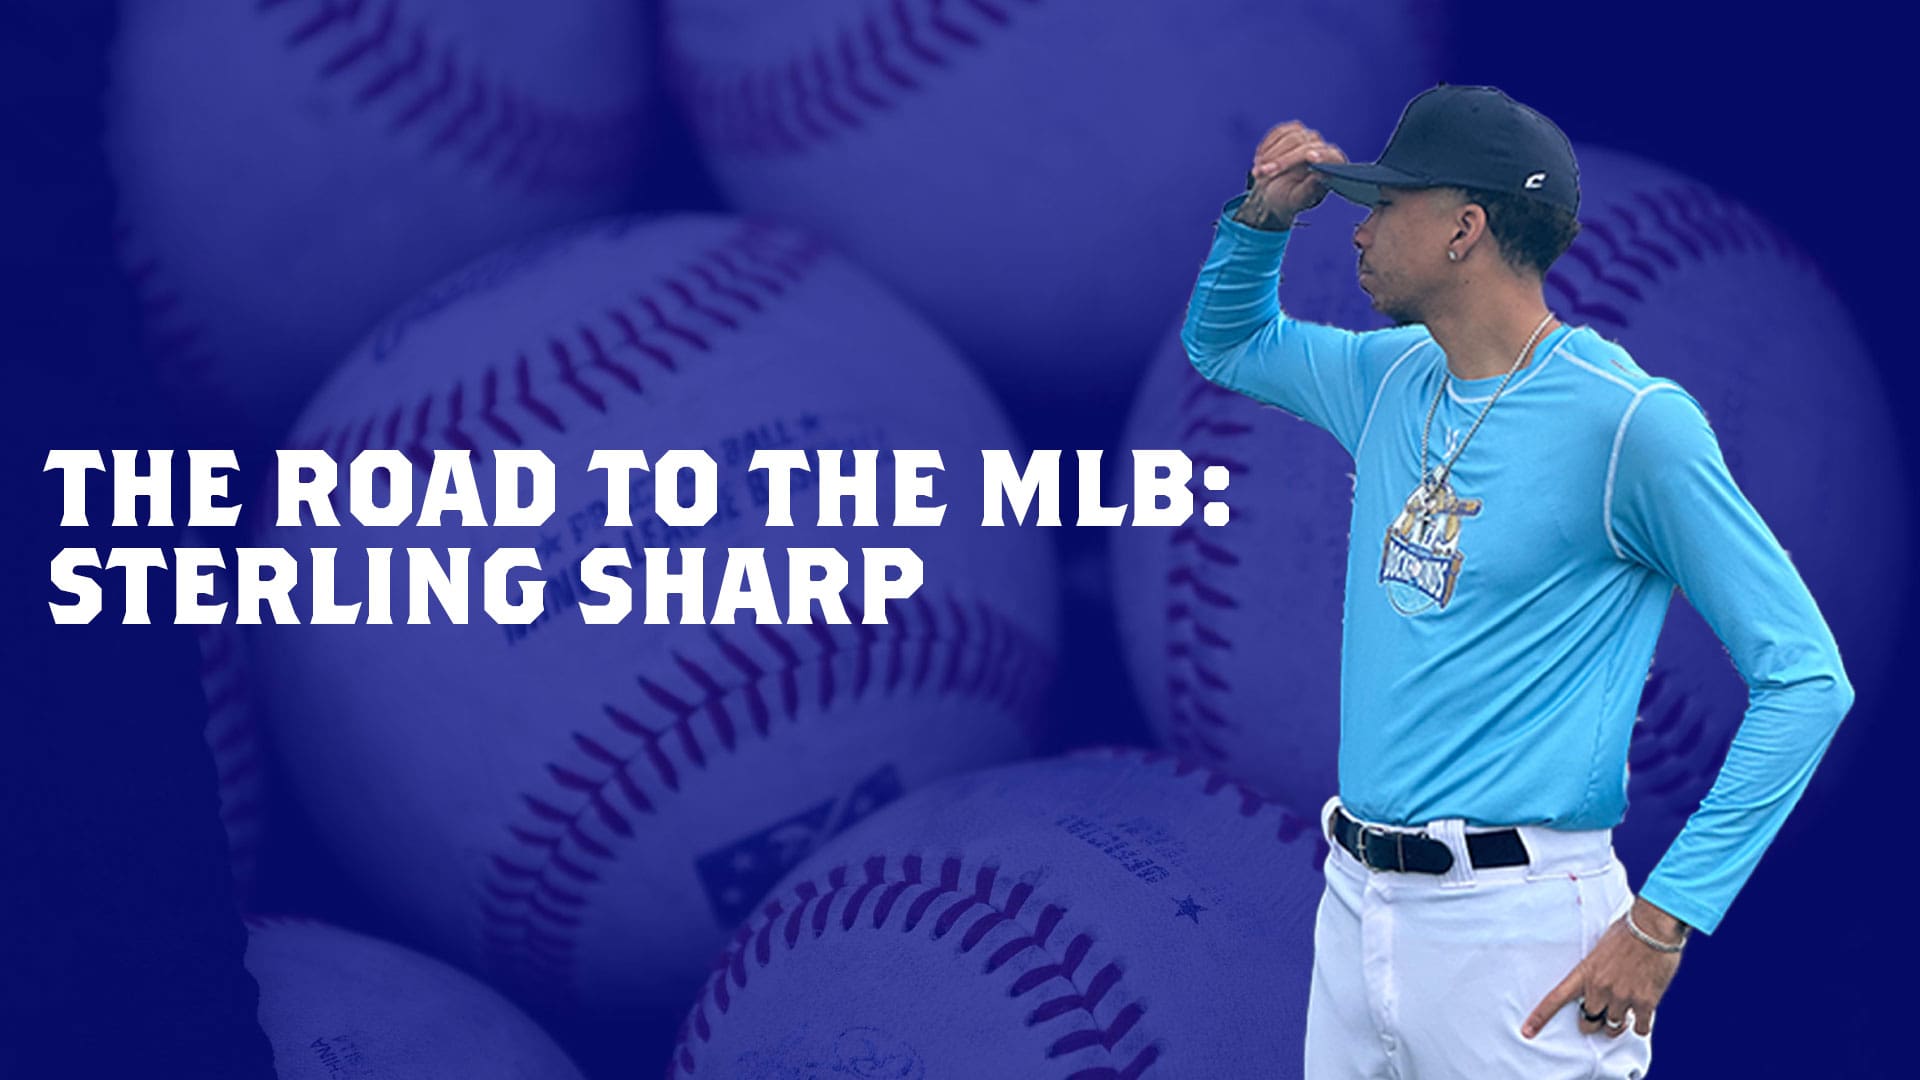 Featured story on Sterling Sharp and his journey to the MLB